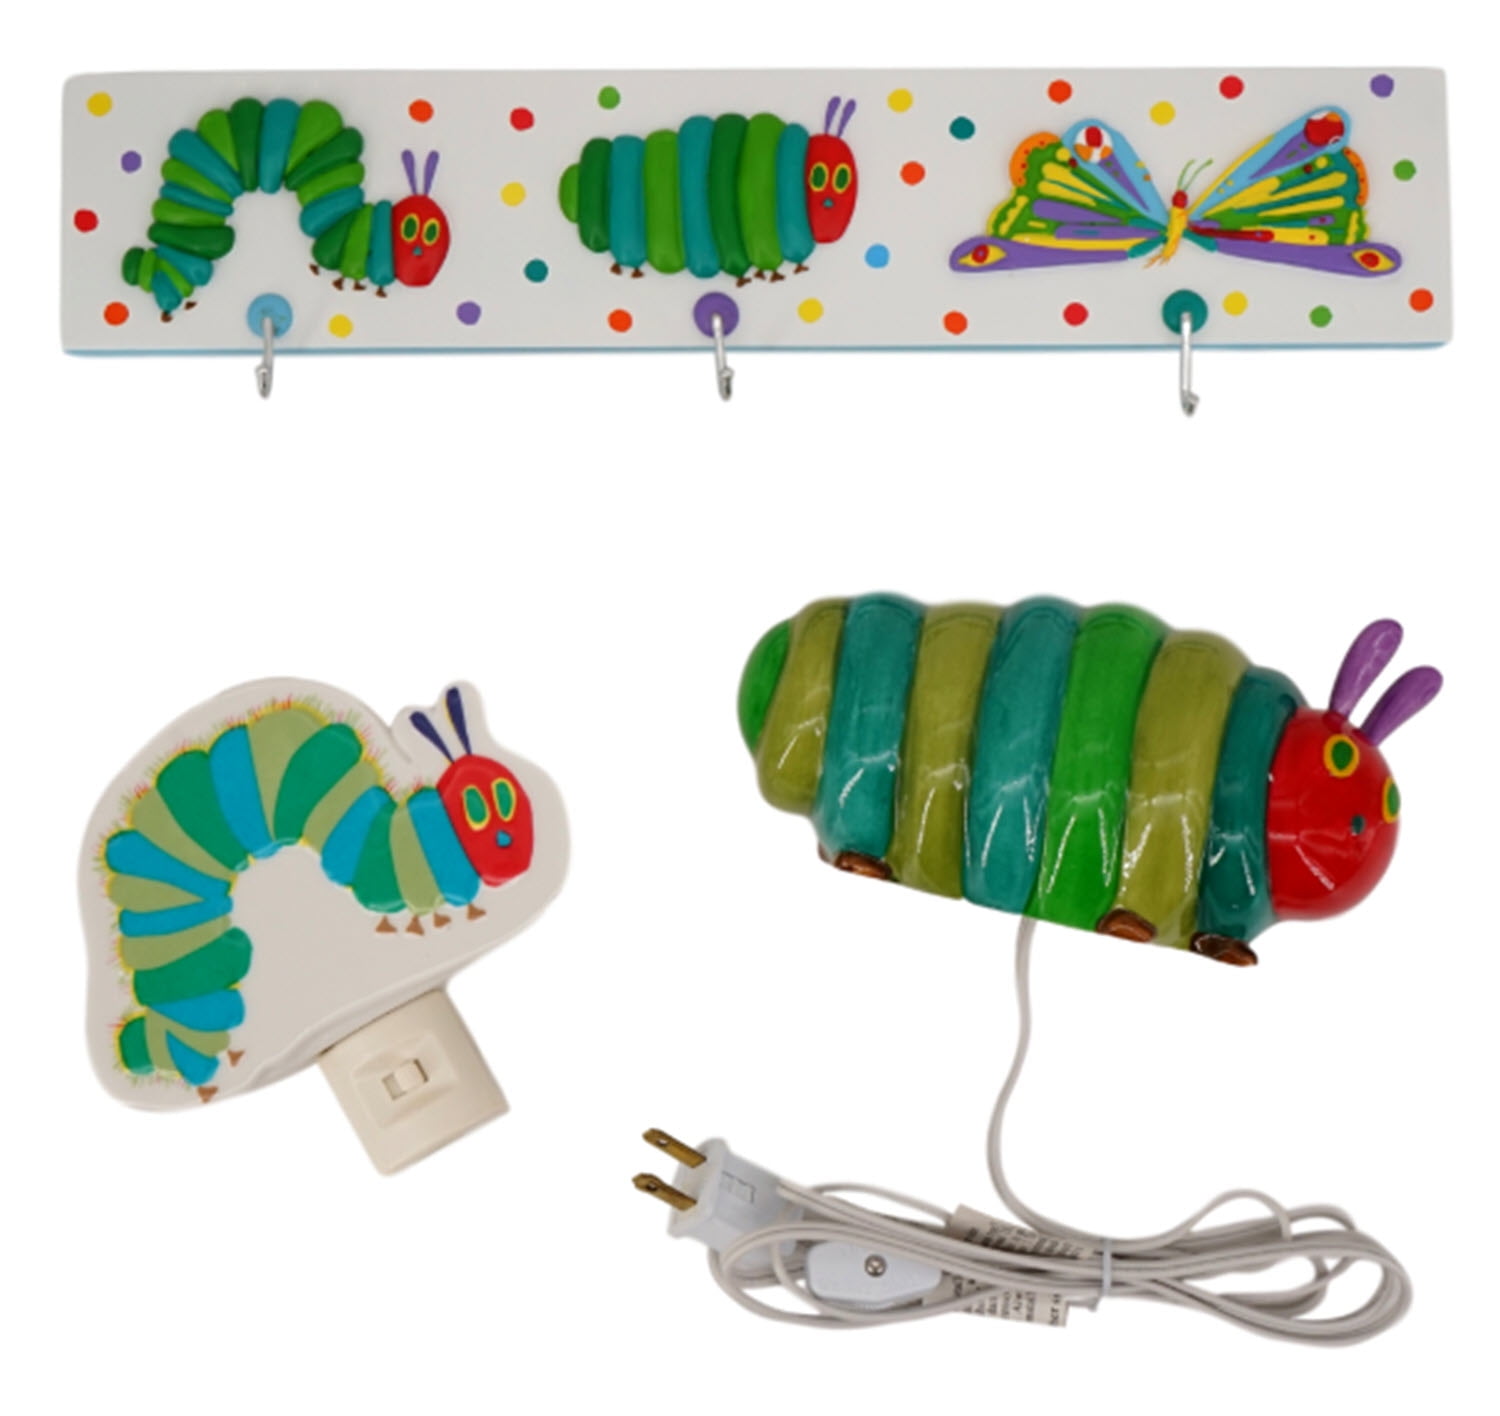 Hungry Little Caterpillar Light Switch Cover Wall Plate Eric Carle Nursery Decor Kids Room Decor 